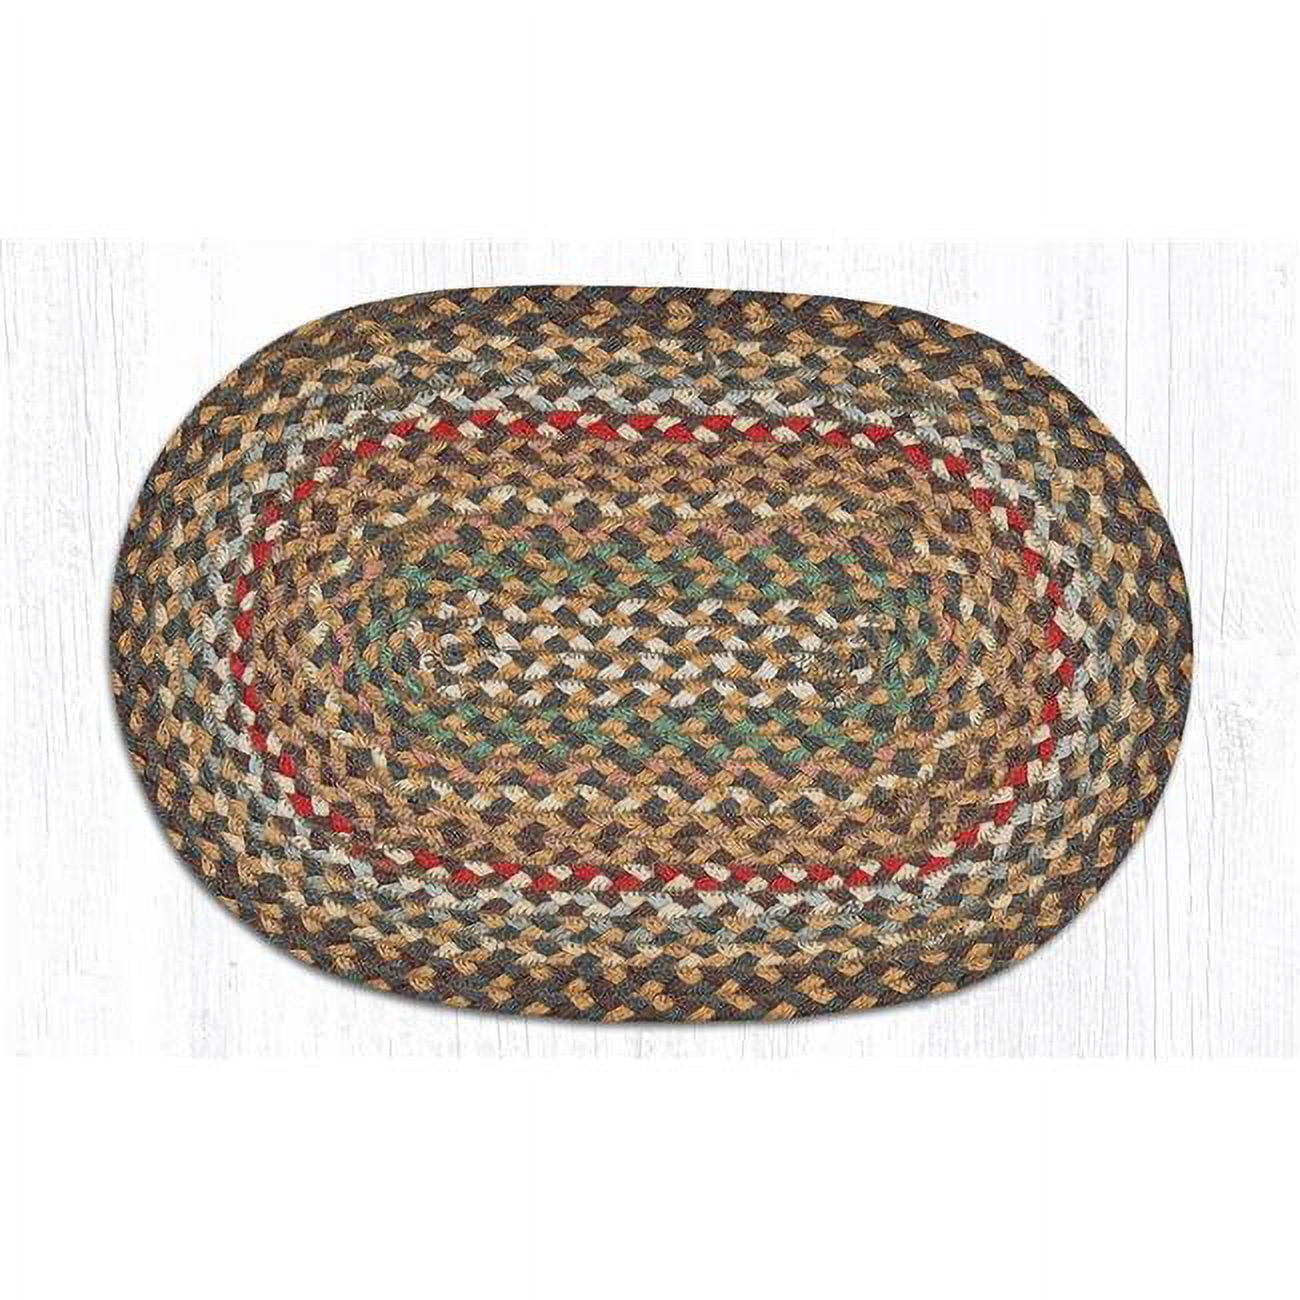 Capitol Importing 52-pm051 13 X 19 In. Jute Oval Placemat - Fir & Ivory